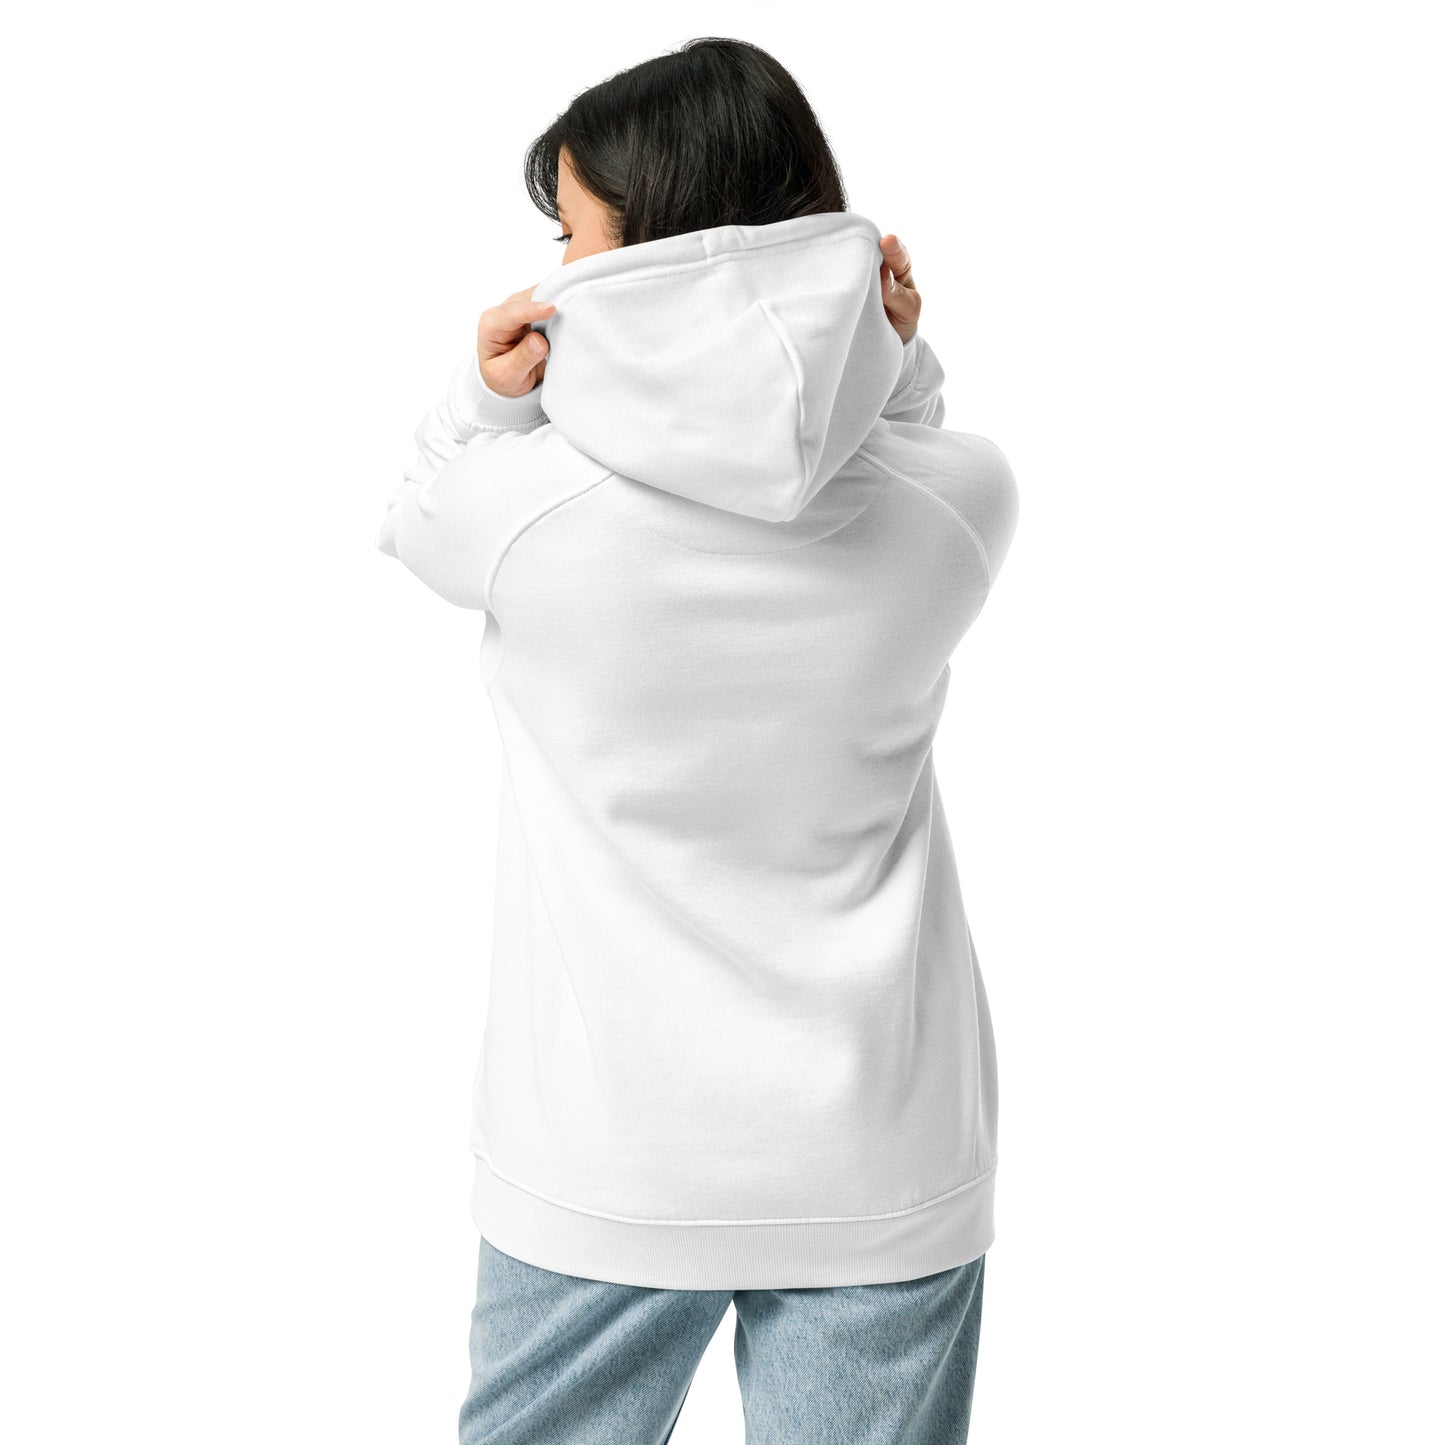 White "Love The One You're With" Hoodie